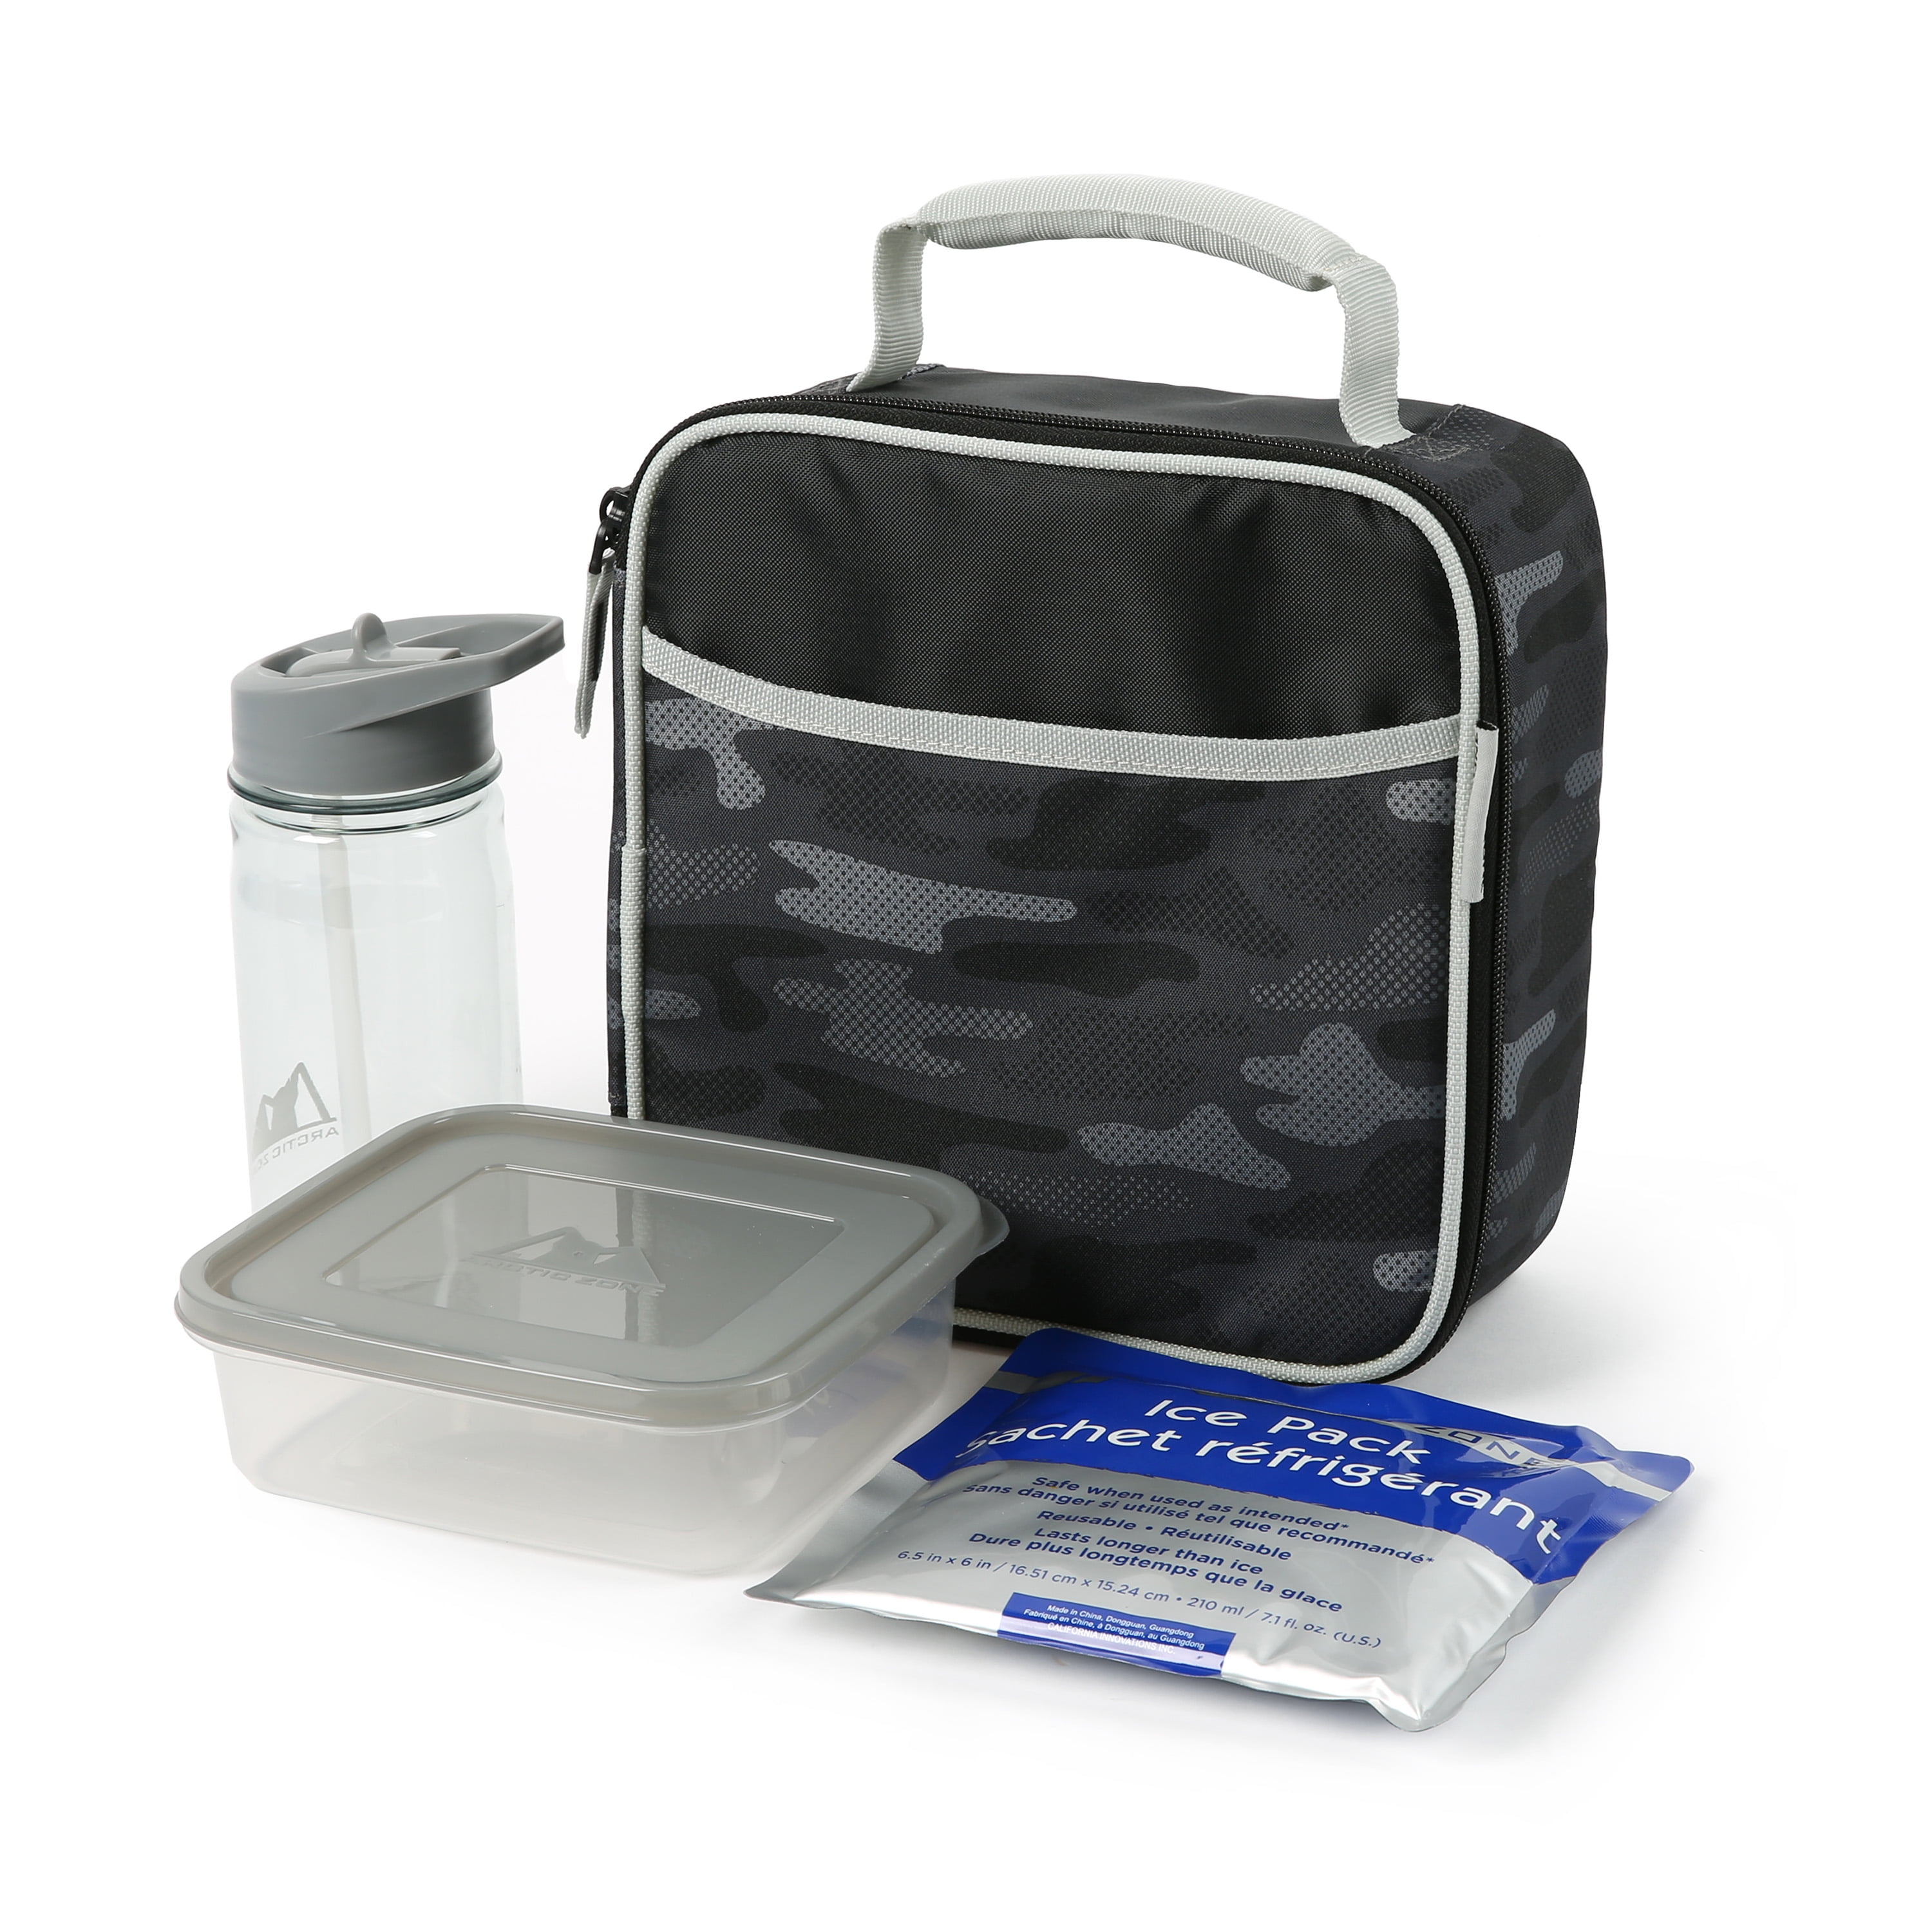 Arctic Zone Lunch Box Combo with Accessories and Microban Protected Easy Clean Lining, Camo, Green